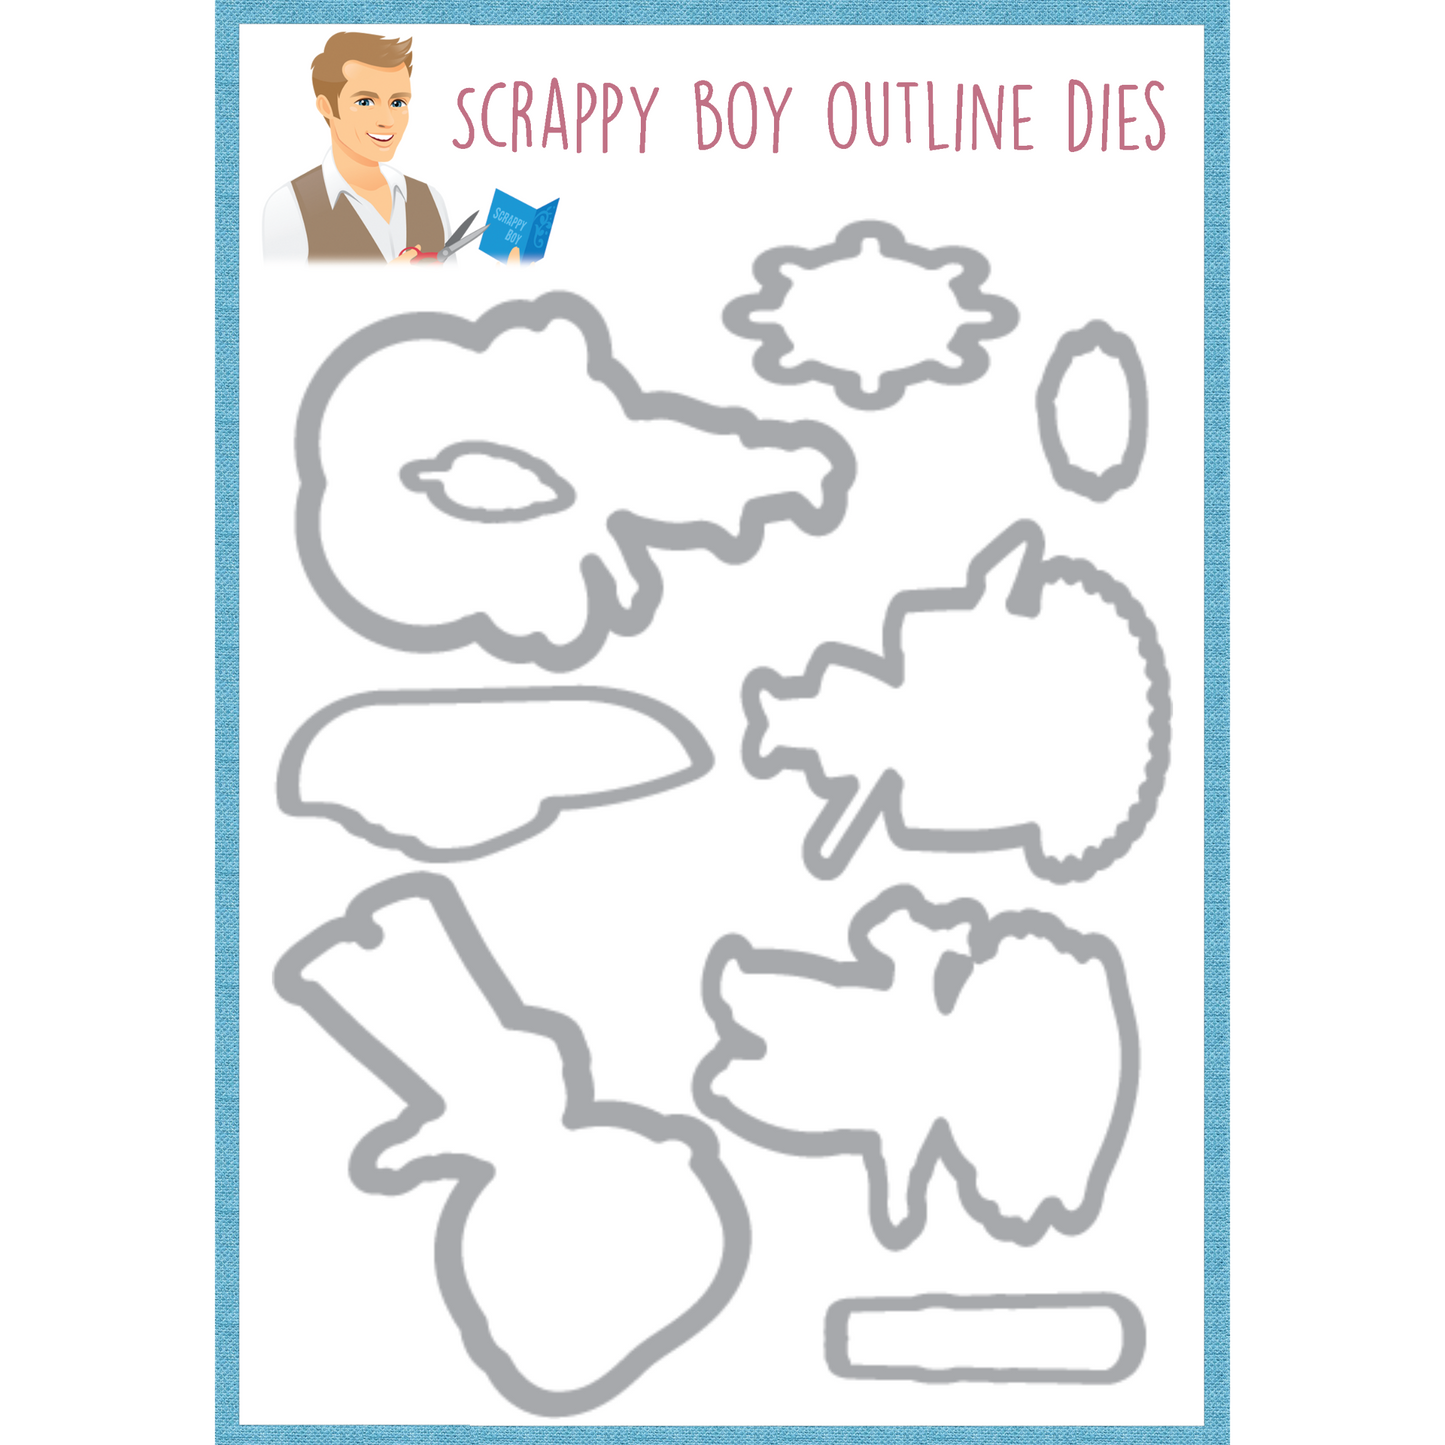 Outline Dies - Three Hour Tour scrappyboystamps